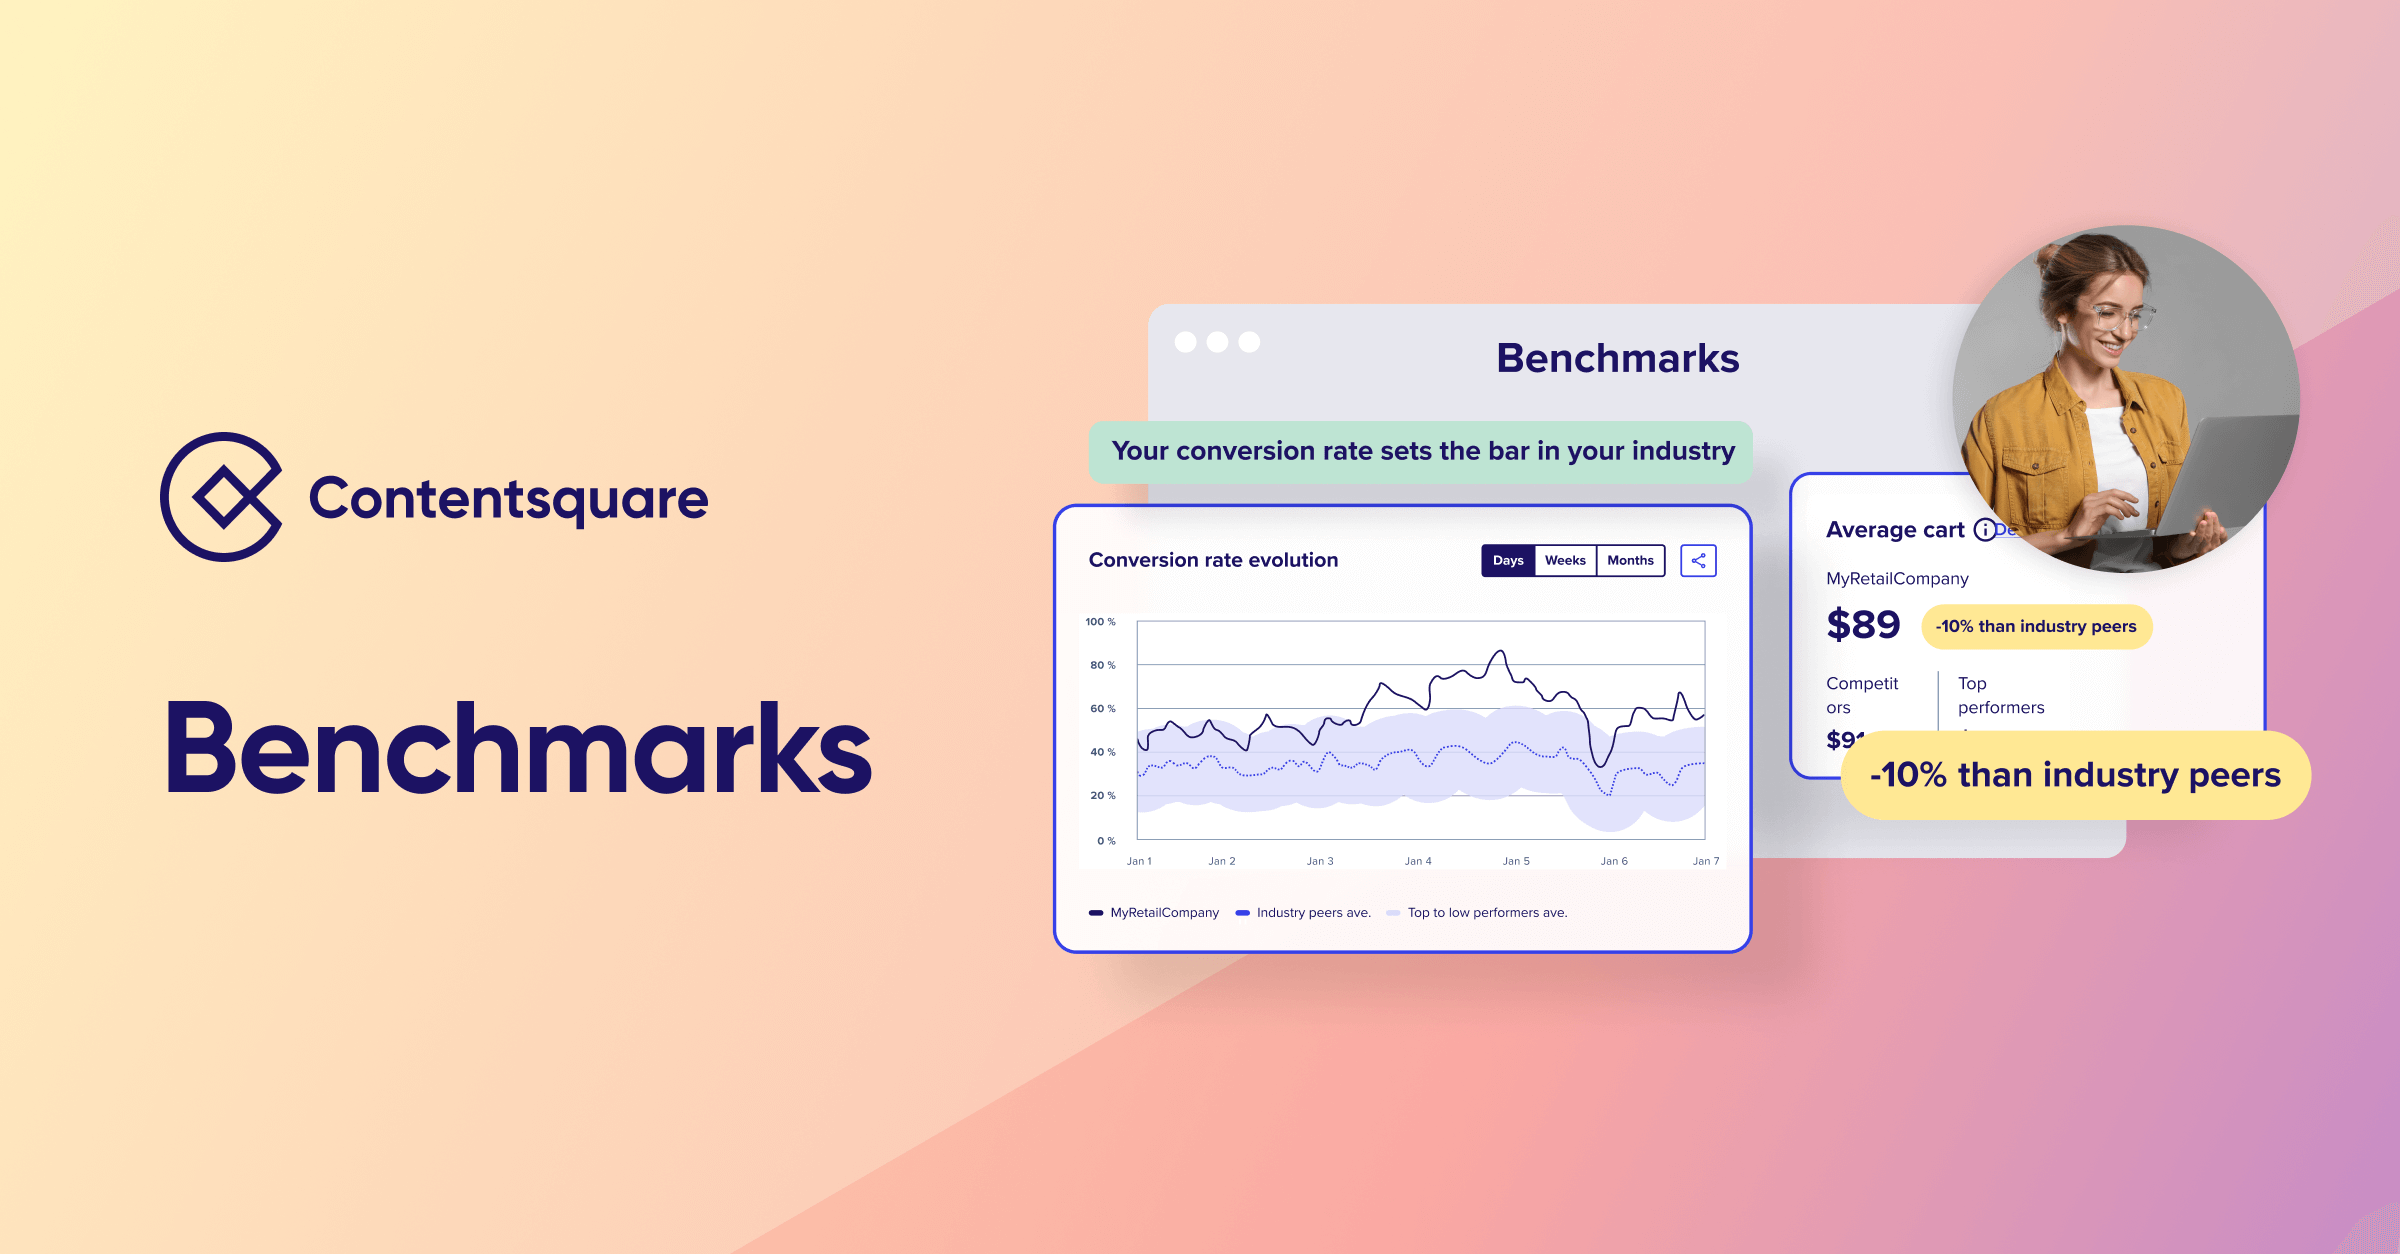 Screenshots from Benchmarks, which allows you to stay abreast of current UX trends and benchmark your digital experience performance against industry peers